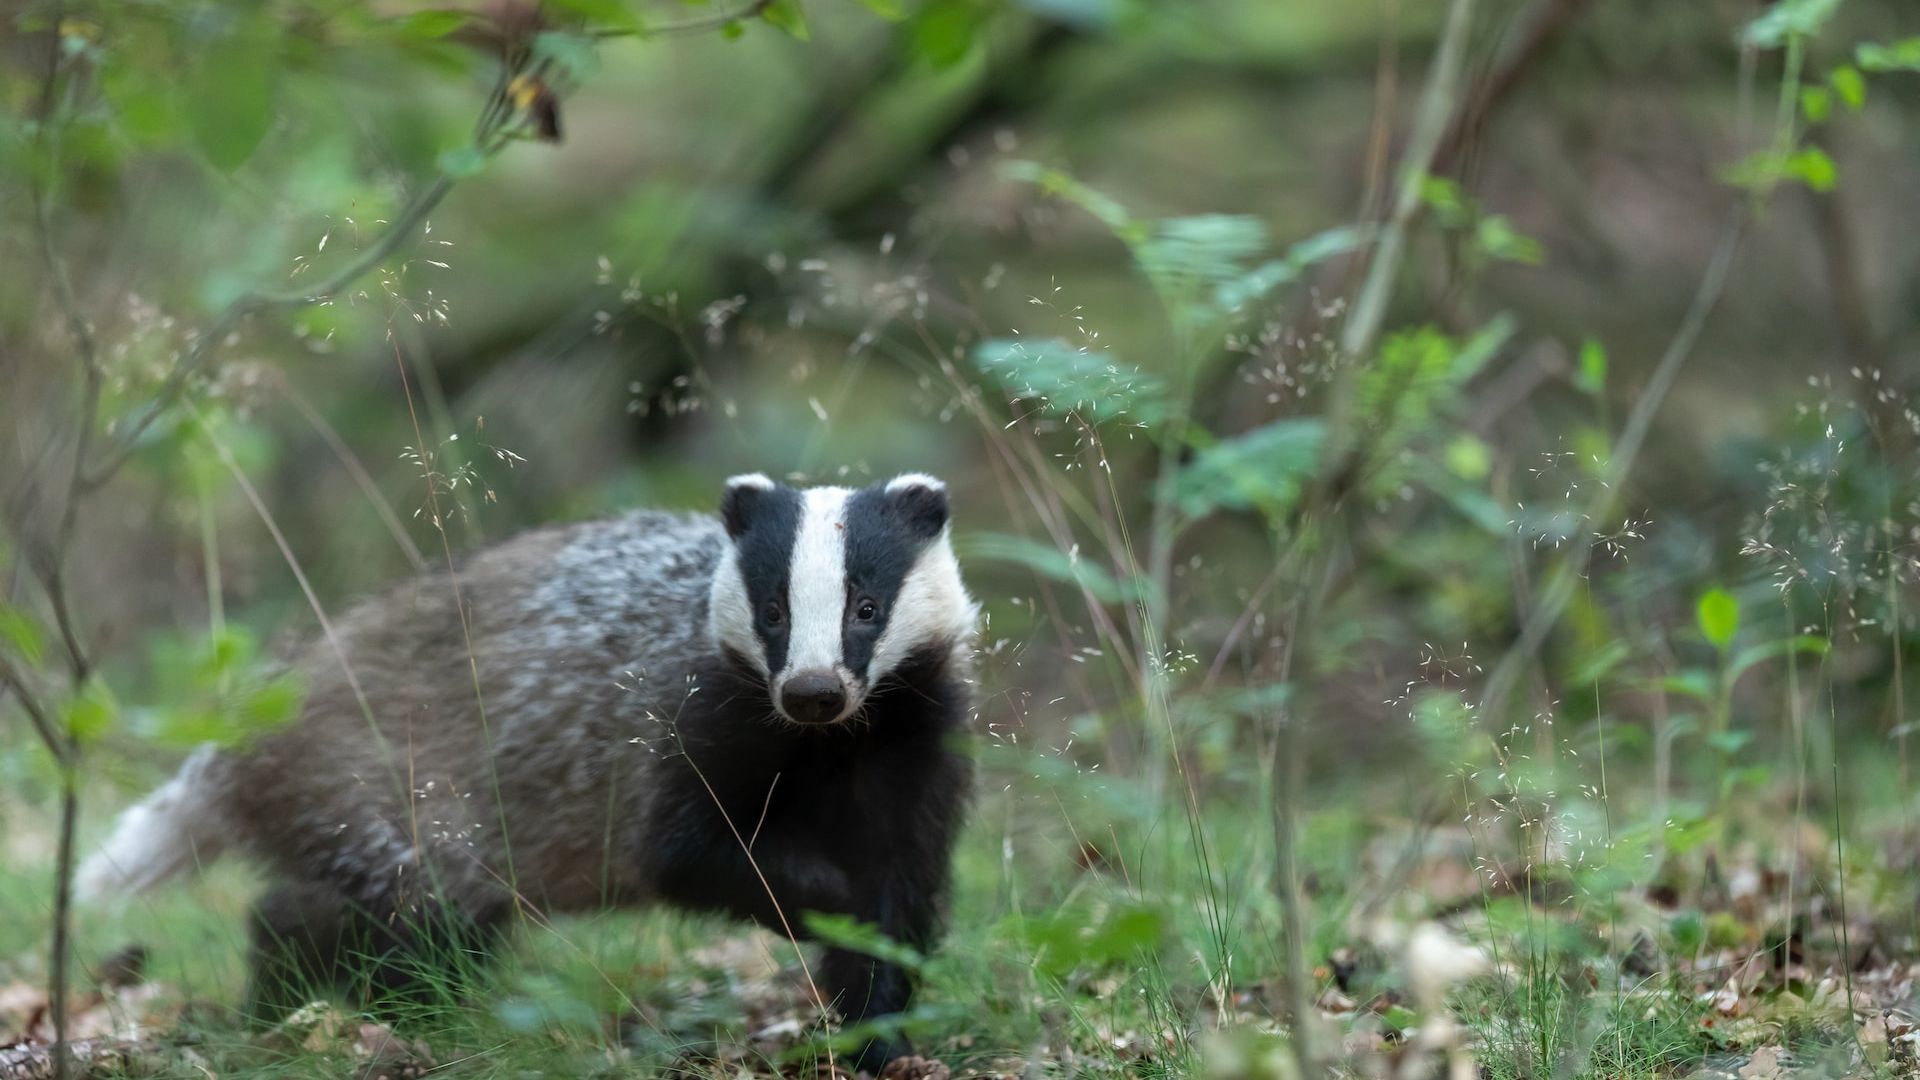 A badger in the wild